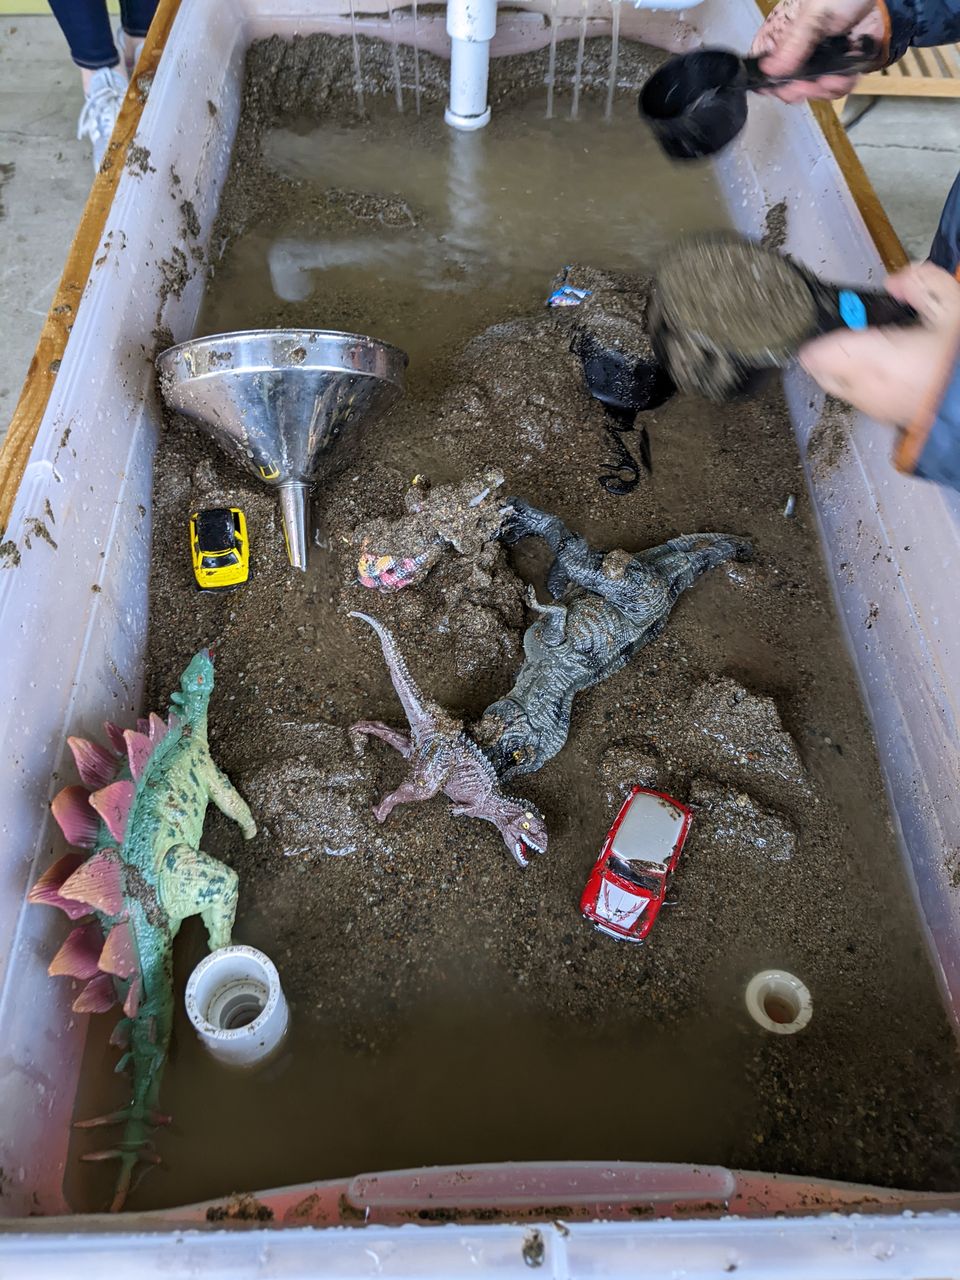 the mud table filled with various dinosaurs, toy cars, and kitchen implements